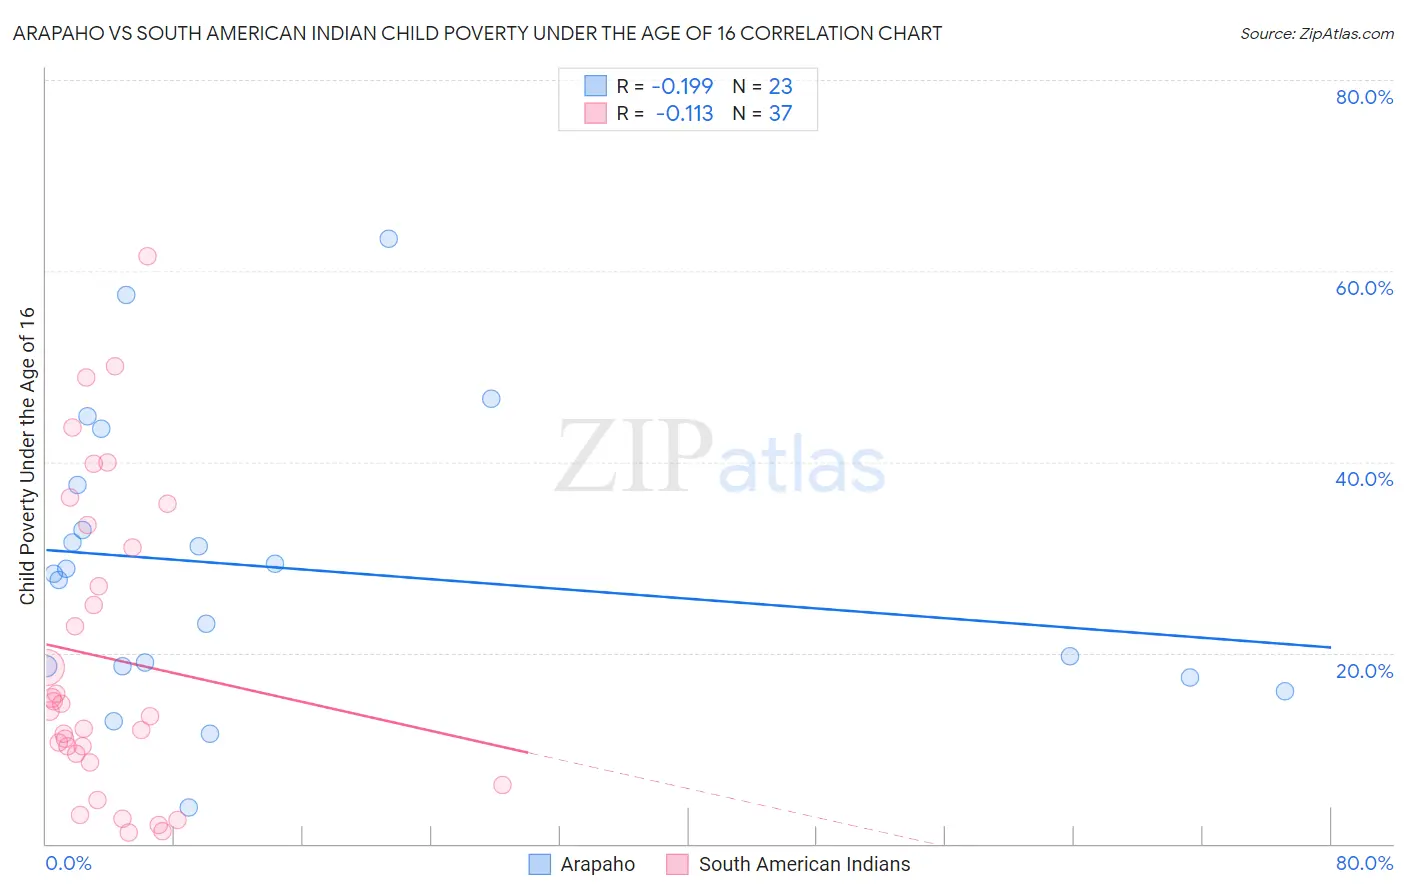 Arapaho vs South American Indian Child Poverty Under the Age of 16